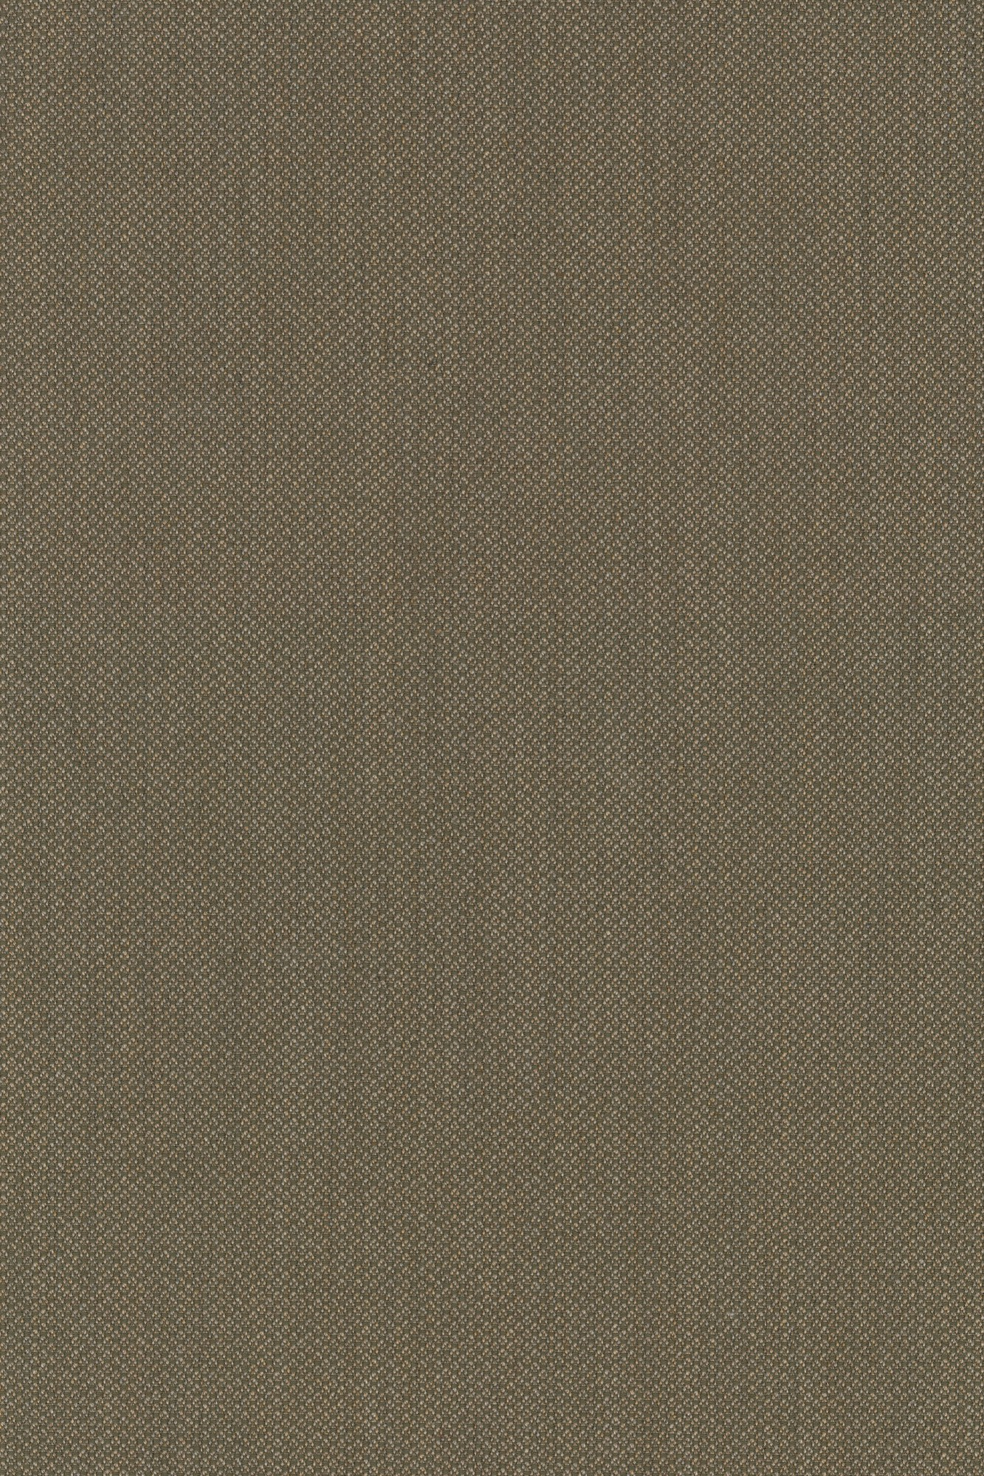 Fabric sample Fiord 951 brown